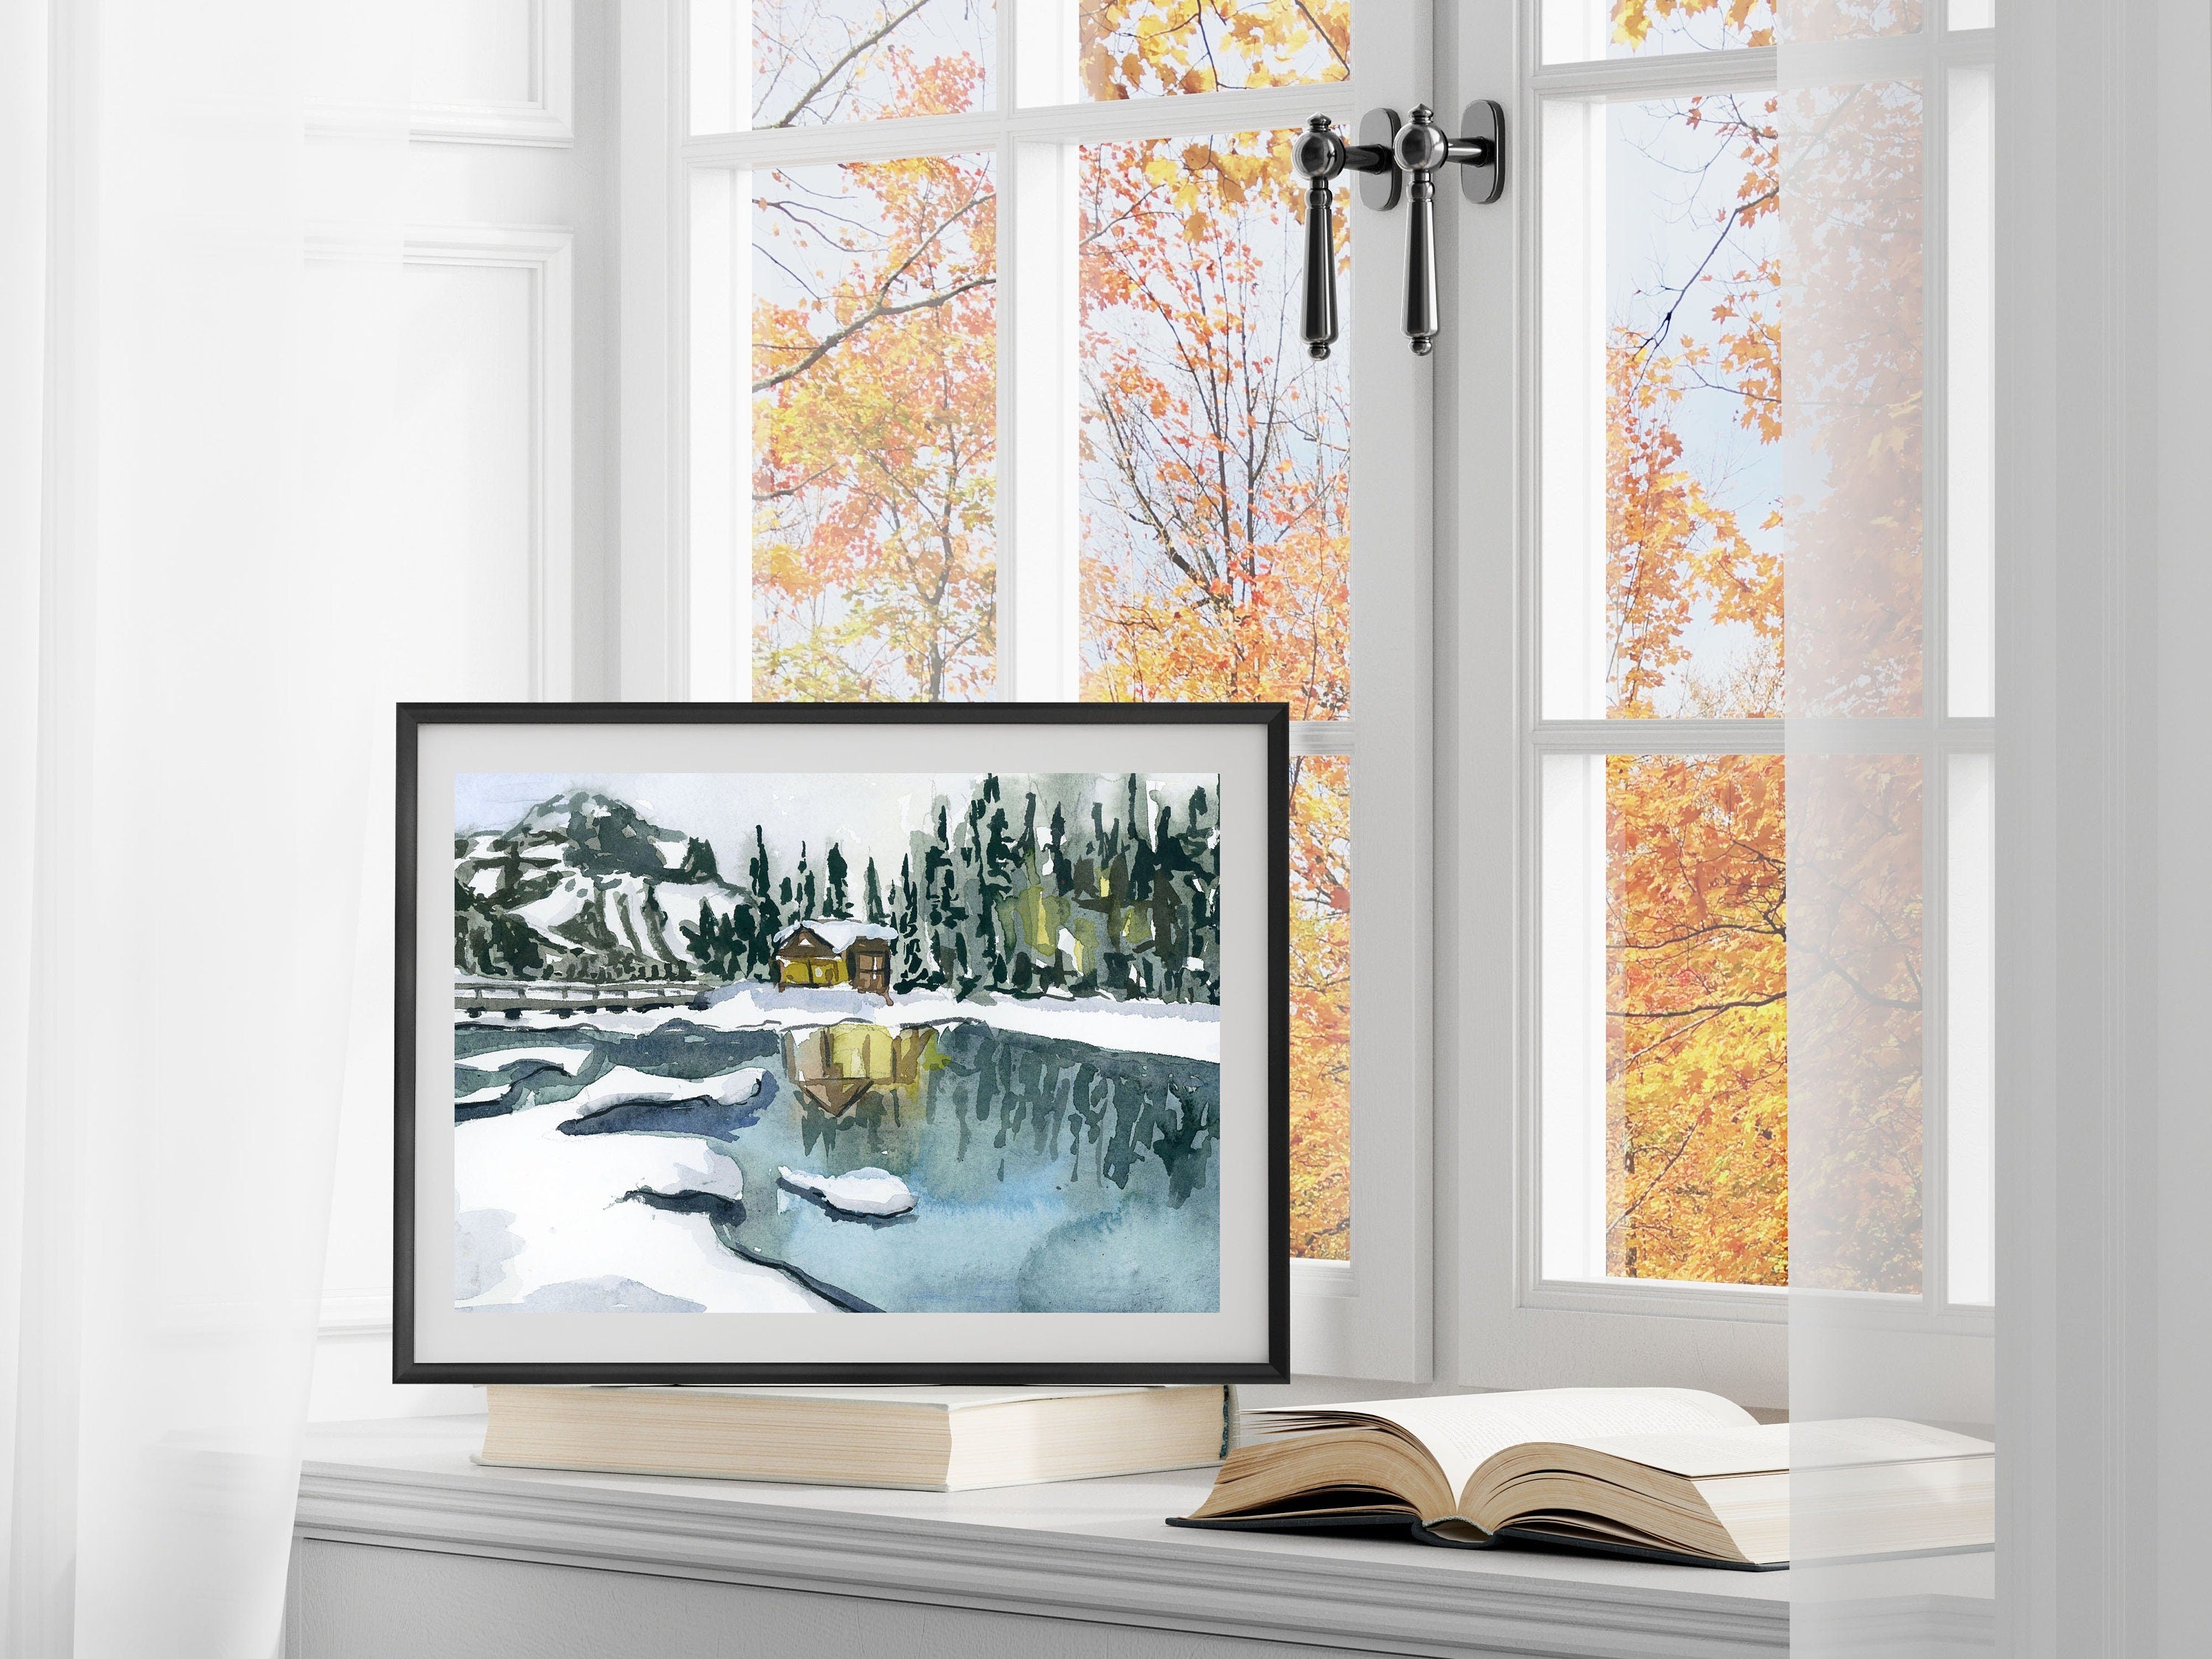 Winter forest and cabin on a lake print of painting by Medjool Studio. Print of an original gouache painting of a cabin lit up an in a winter forest on a lake.